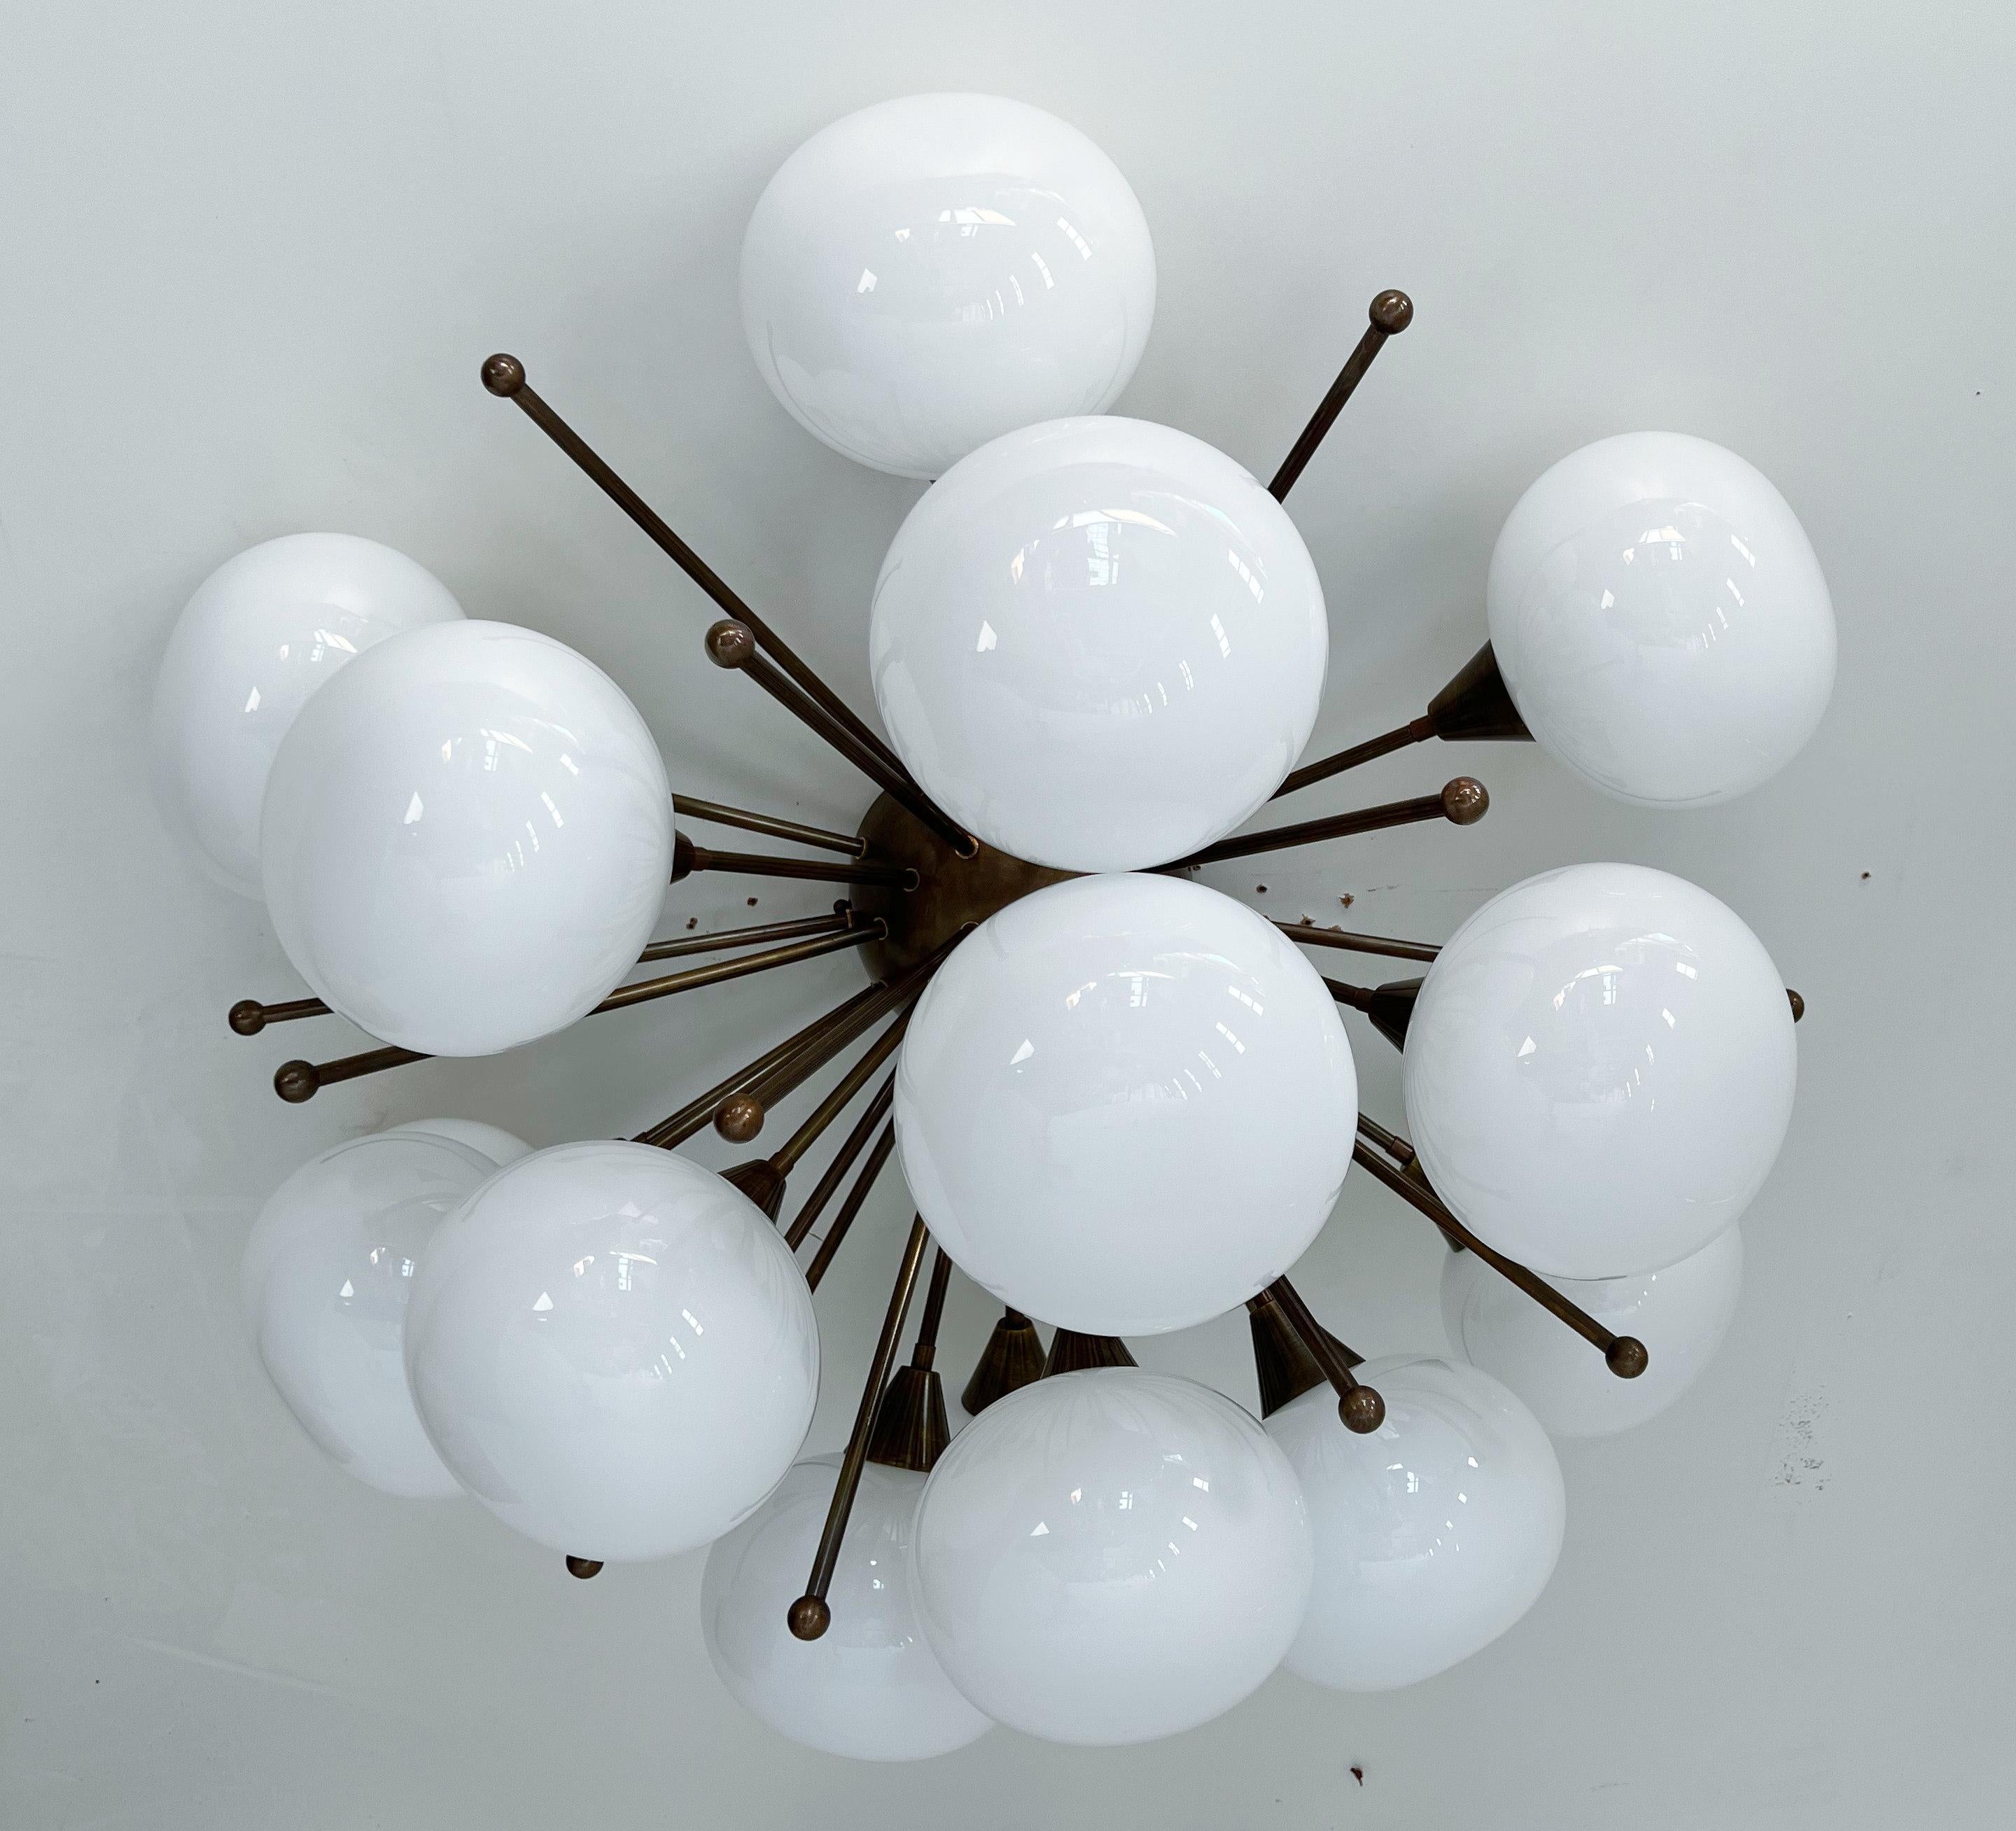 Italian Sputnik flush mount with glossy white Murano glass pebble shades mounted on solid brass frame / Designed by Fabio Bergomi for Fabio Ltd / Made in Italy
15 lights / E12 or E14 type / max 40W each
Measures: Diameter 35.5 inches, height 18